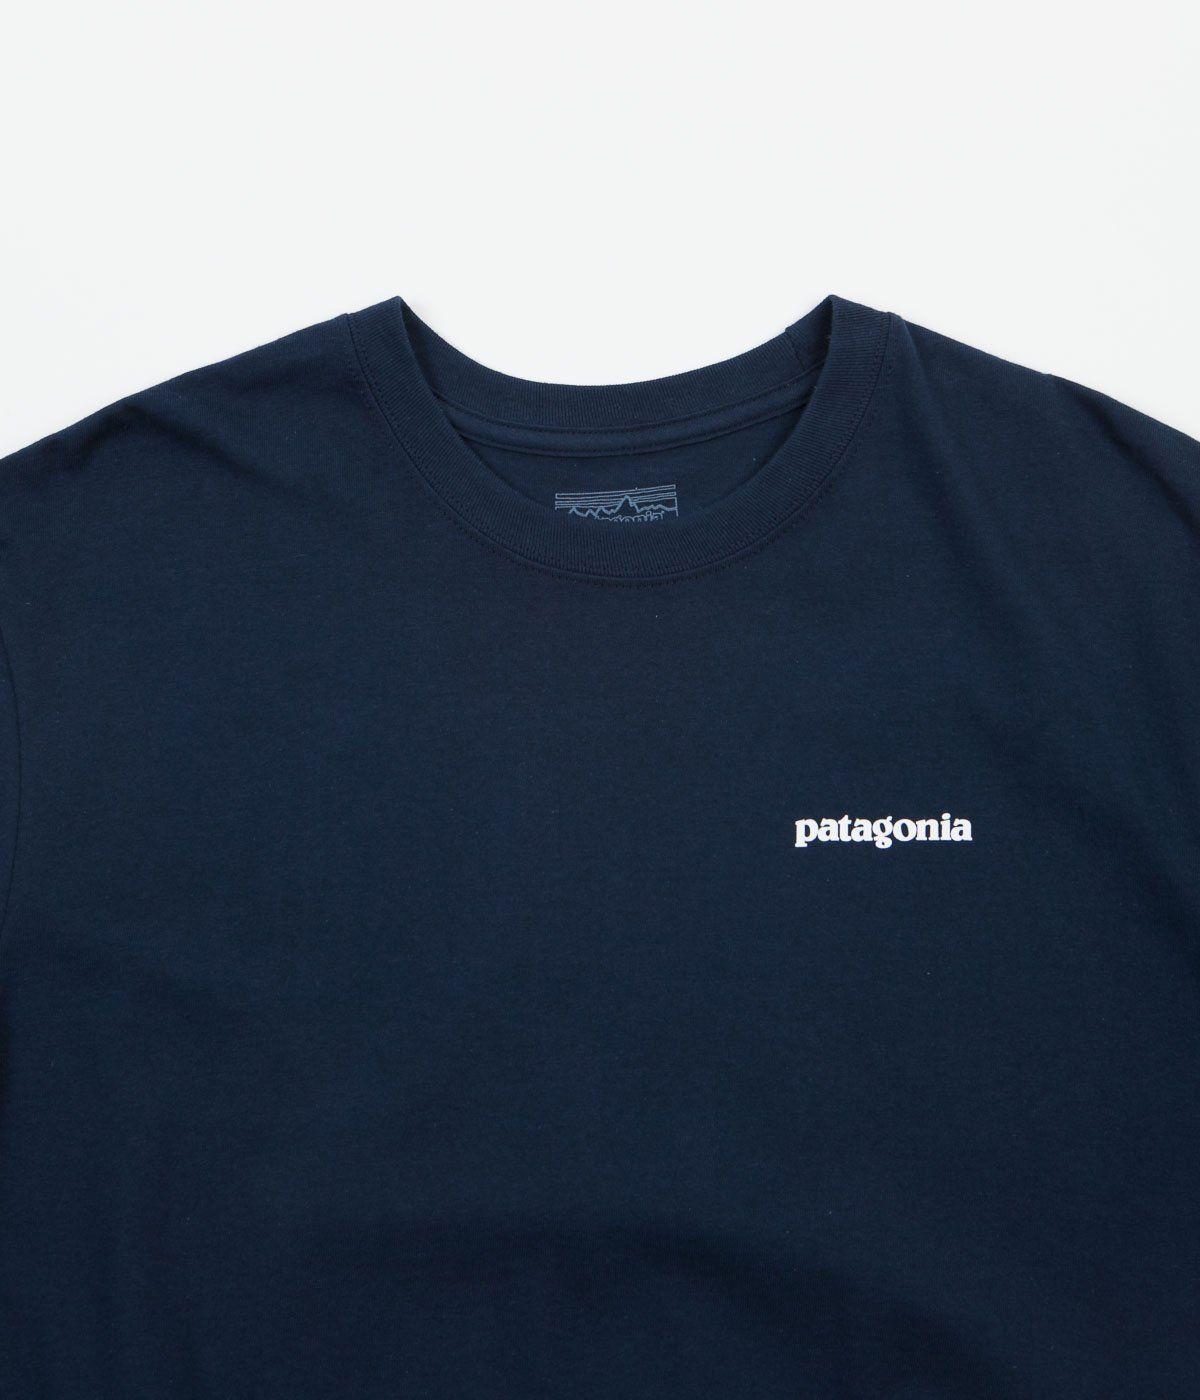 Grey and Navy Blue Logo - Patagonia P 6 Logo T Shirt Blue. Always In Colour